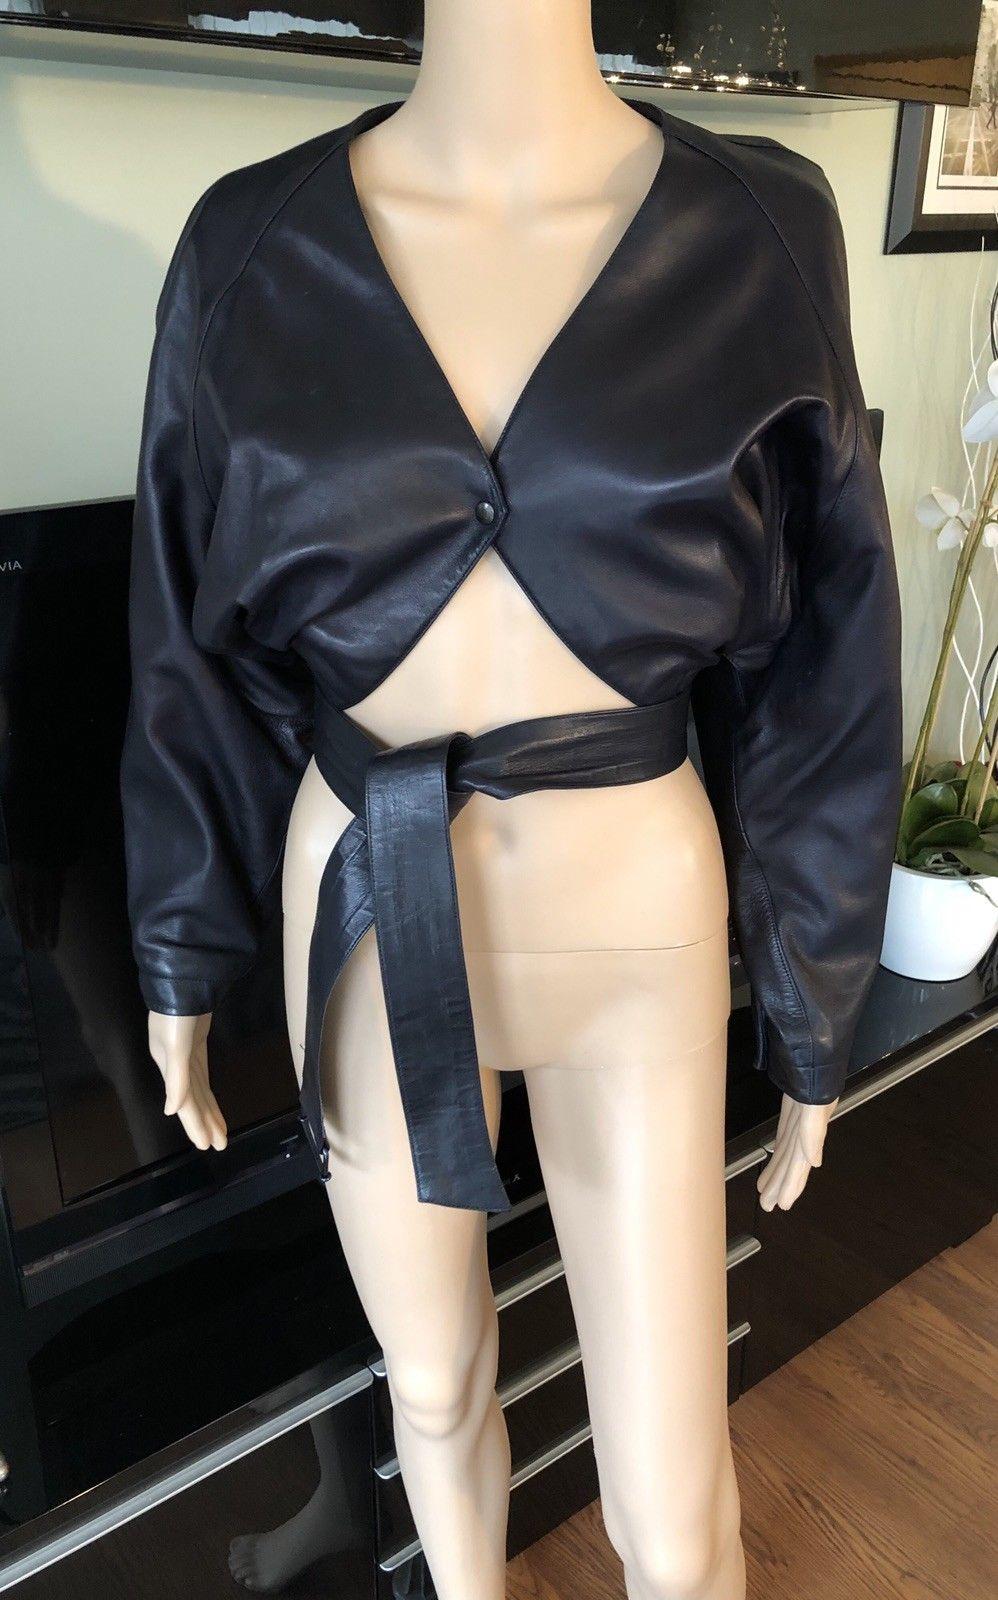 Azzedine Alaia c. 1990's Vintage Sexy Cutout  Leather Top Jacket

Alaïa crop leather jacket with long sleeves, belted waist and snap closure at front.

All Eyes on Alaïa

For the last half-century, the world’s most fashionable and adventuresome